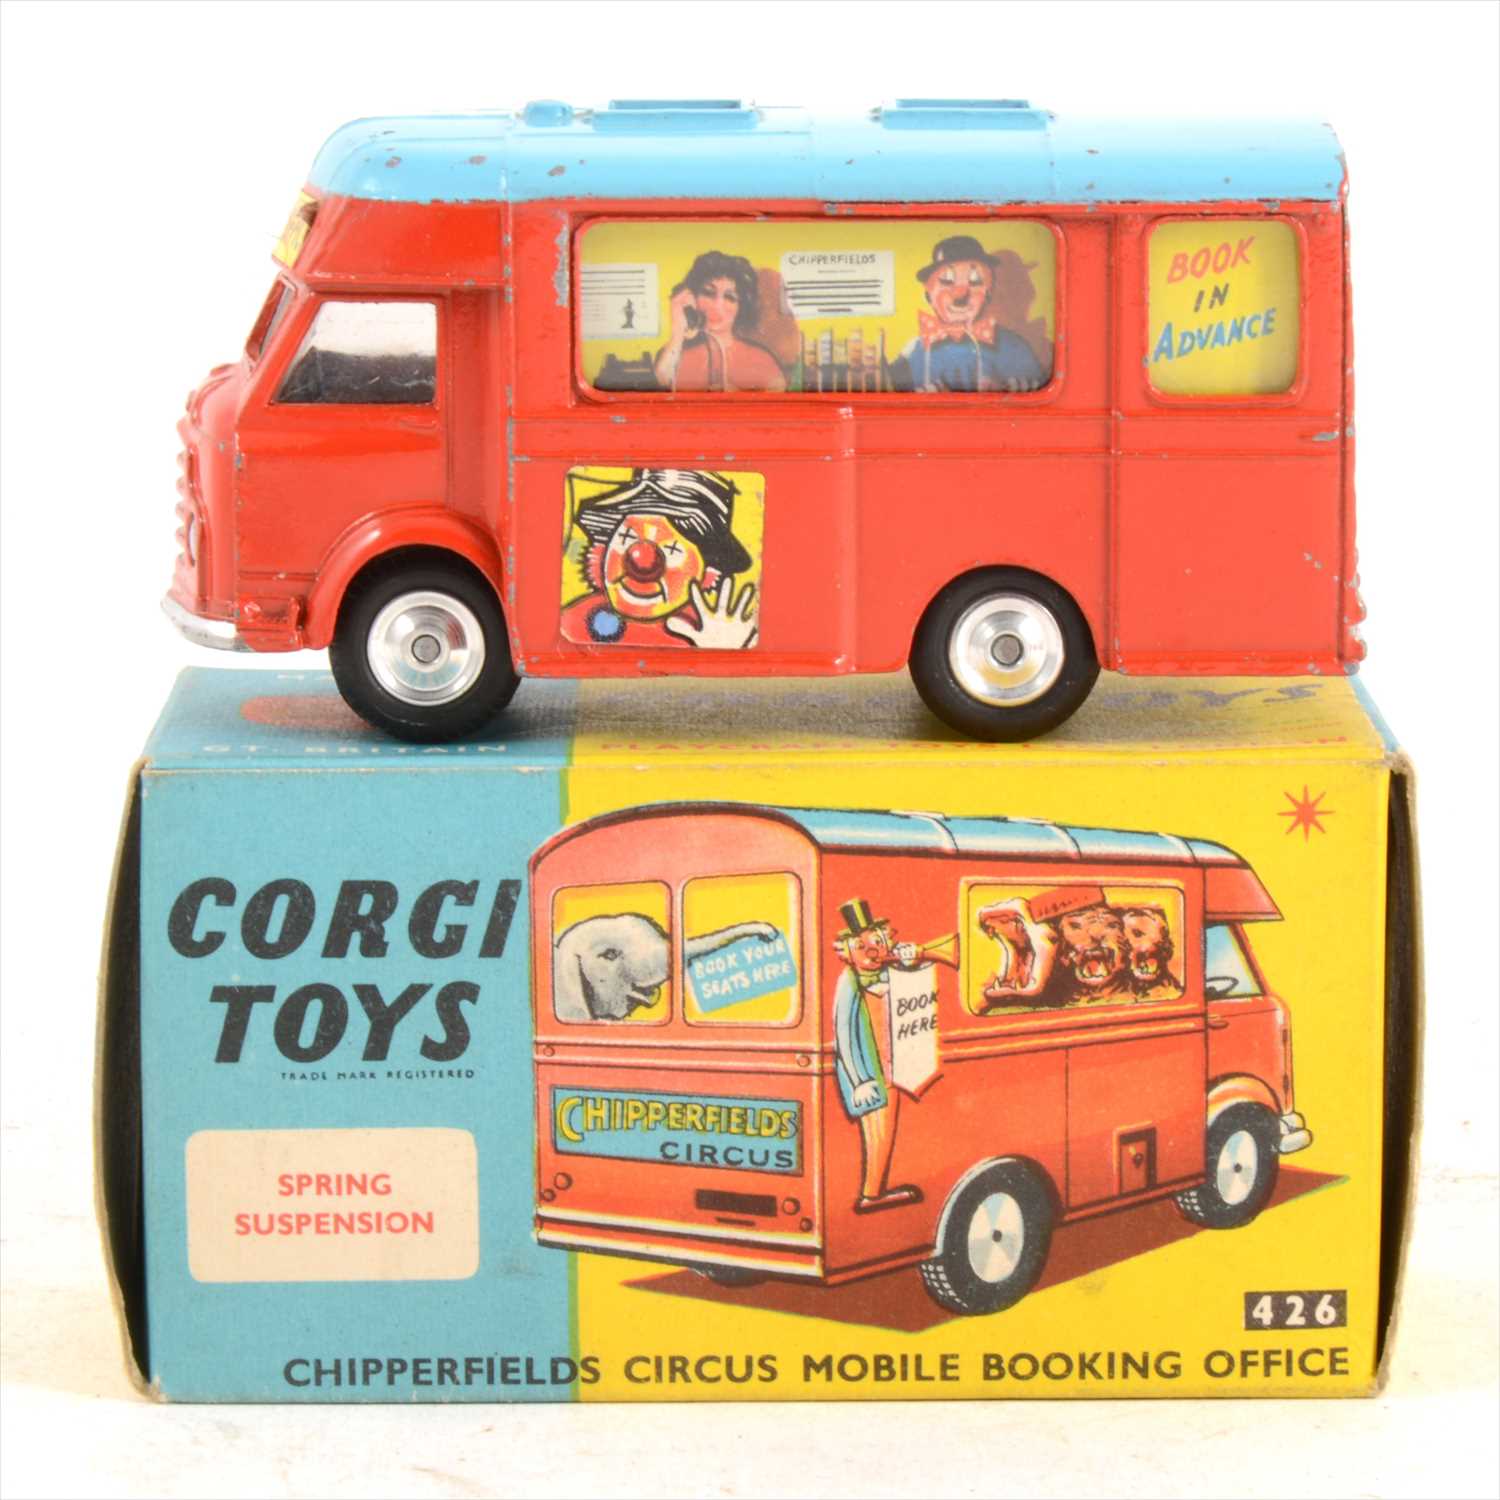 Corgi Toys Chipperfields Circus 426 1121 1123 Poster Leaflet Shop Sign A4 Size 